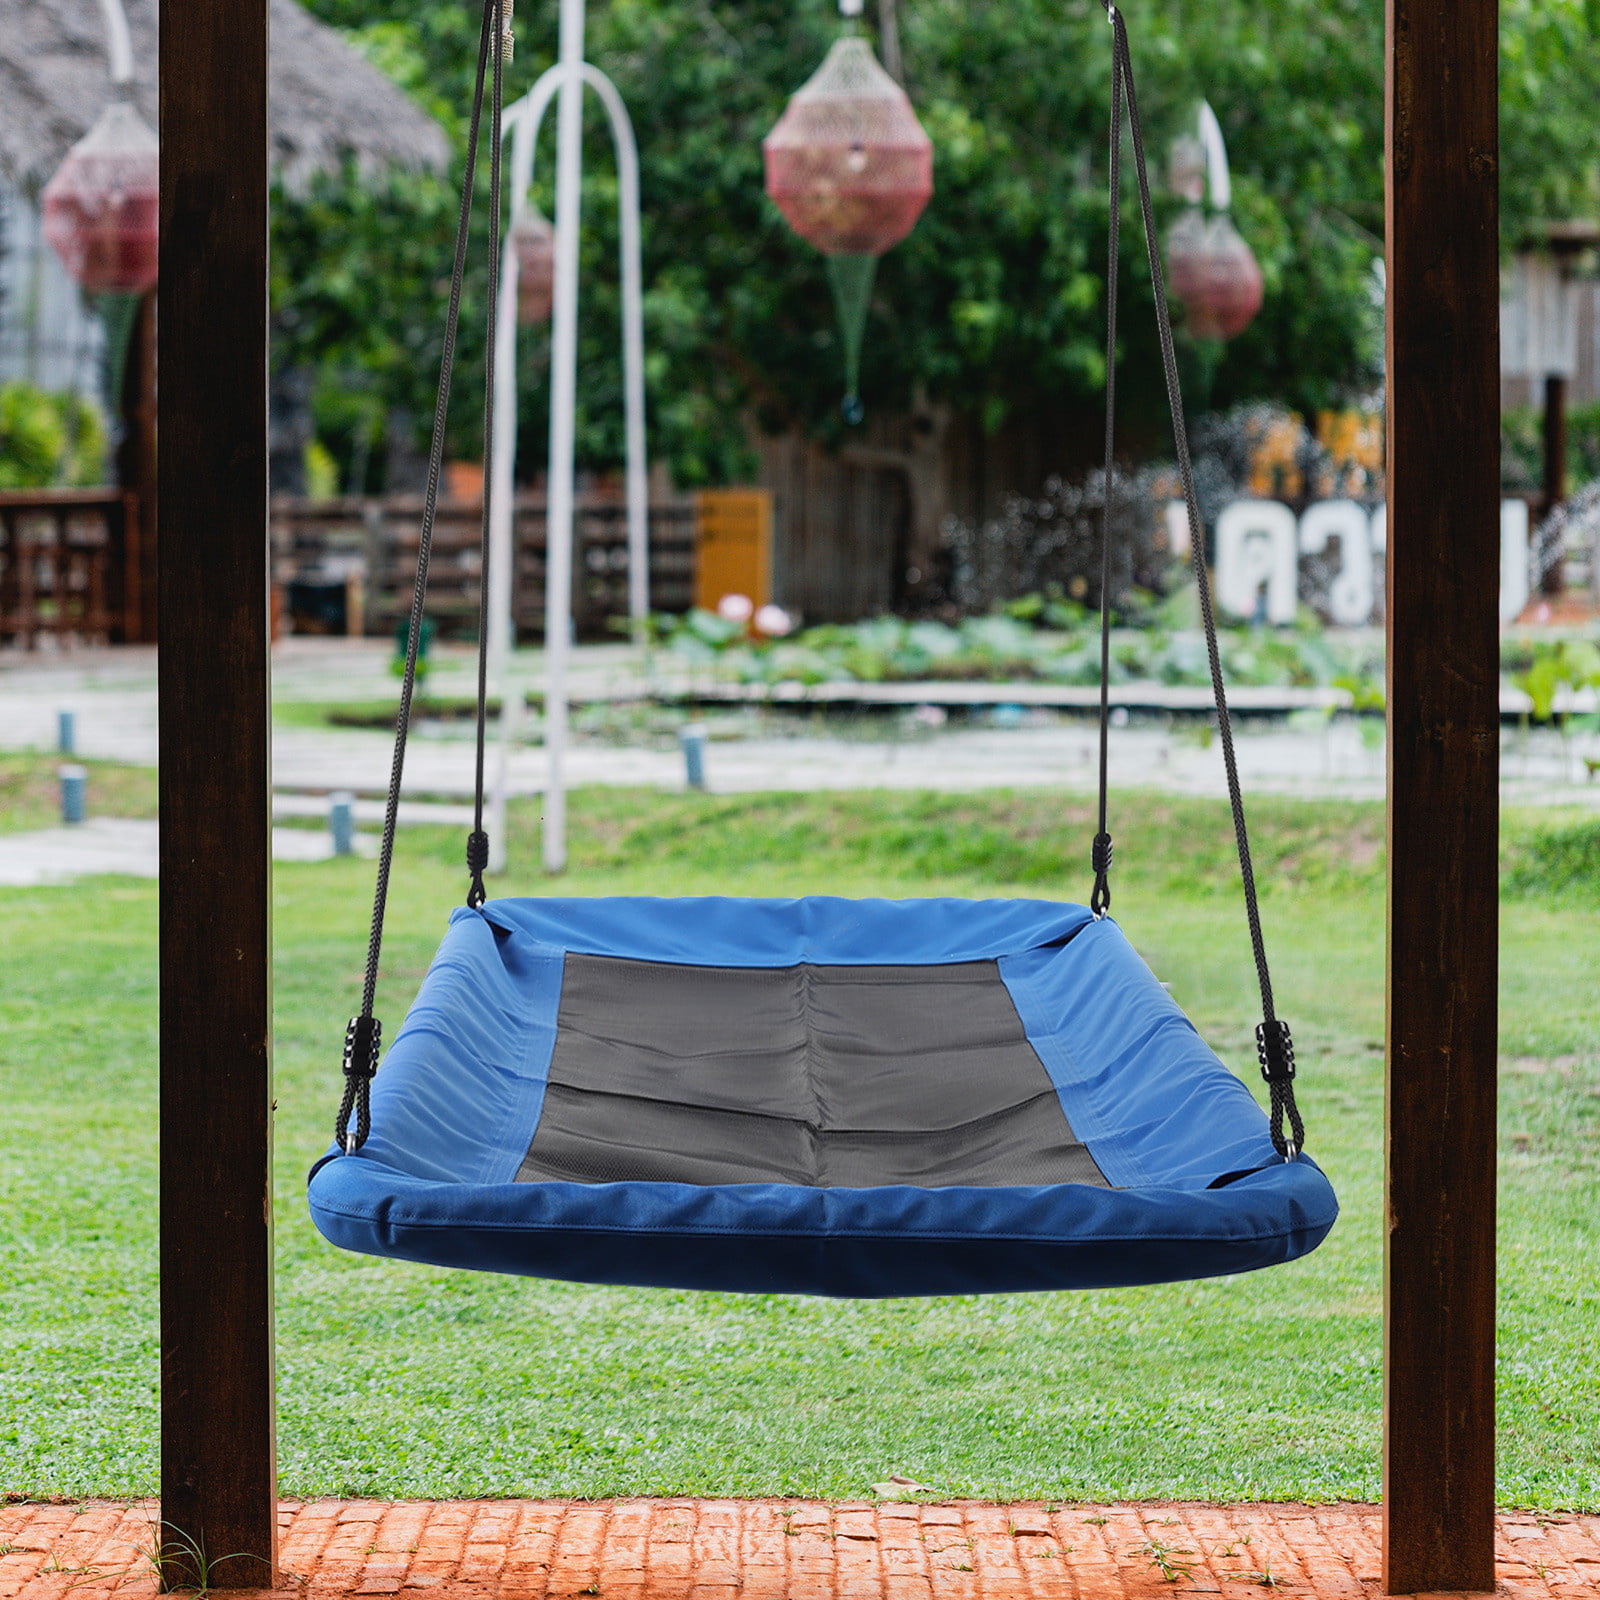 Details about   New Kids Outdoor Tree Swing Gym Climbing Rope Swing Seat Garden Playground Toy 